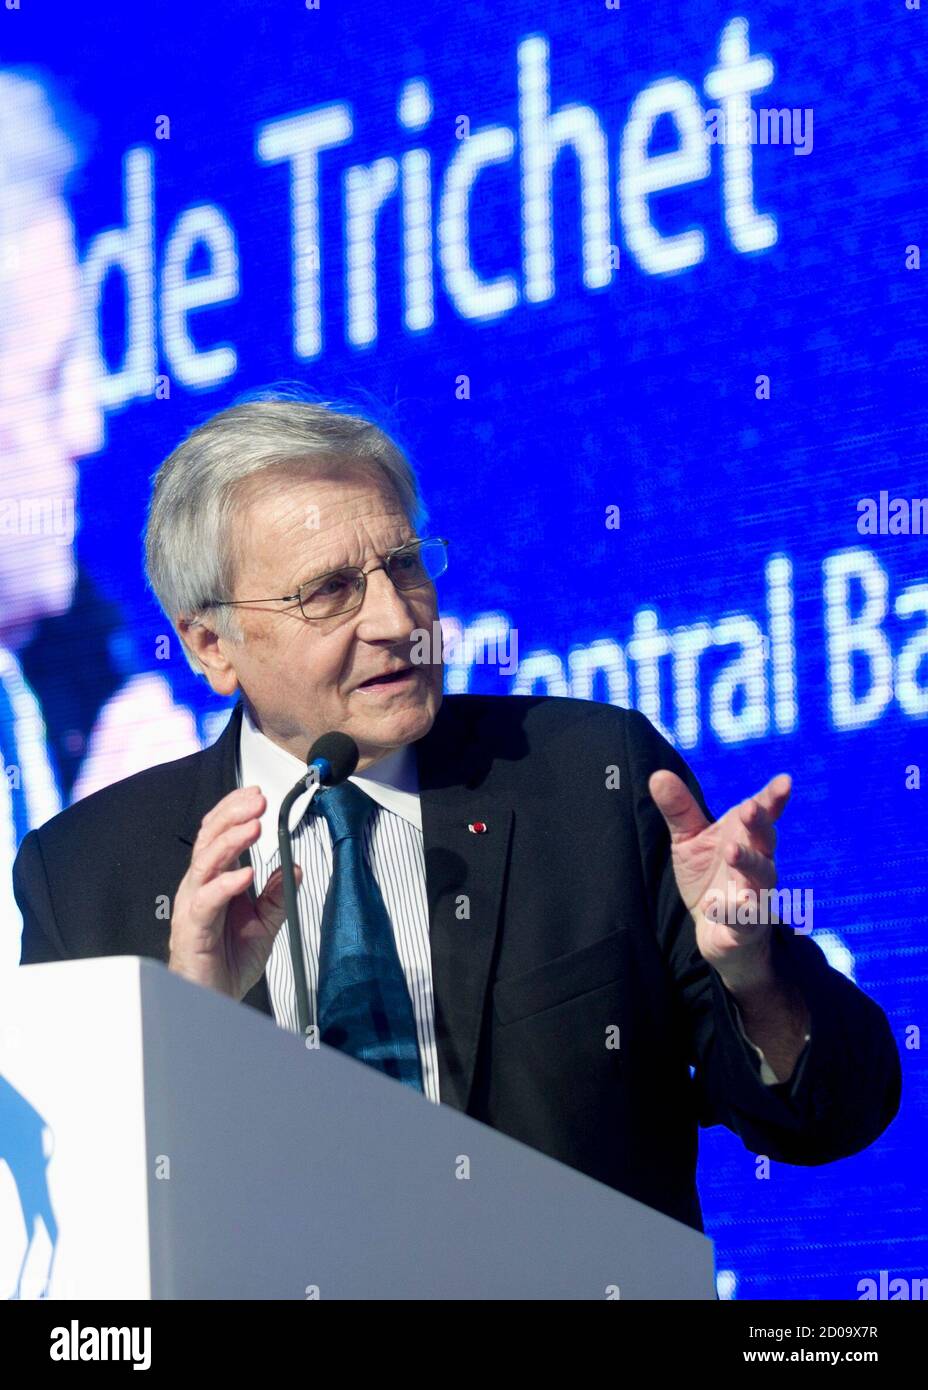 Jean-Claude Trichet, former European Central Bank President and former  governor of Banque De France, speaks at a seminar in Kuwait hosted by the  National Bank of Kuwait April 10, 2012. REUTERS/Stephanie McGehee (